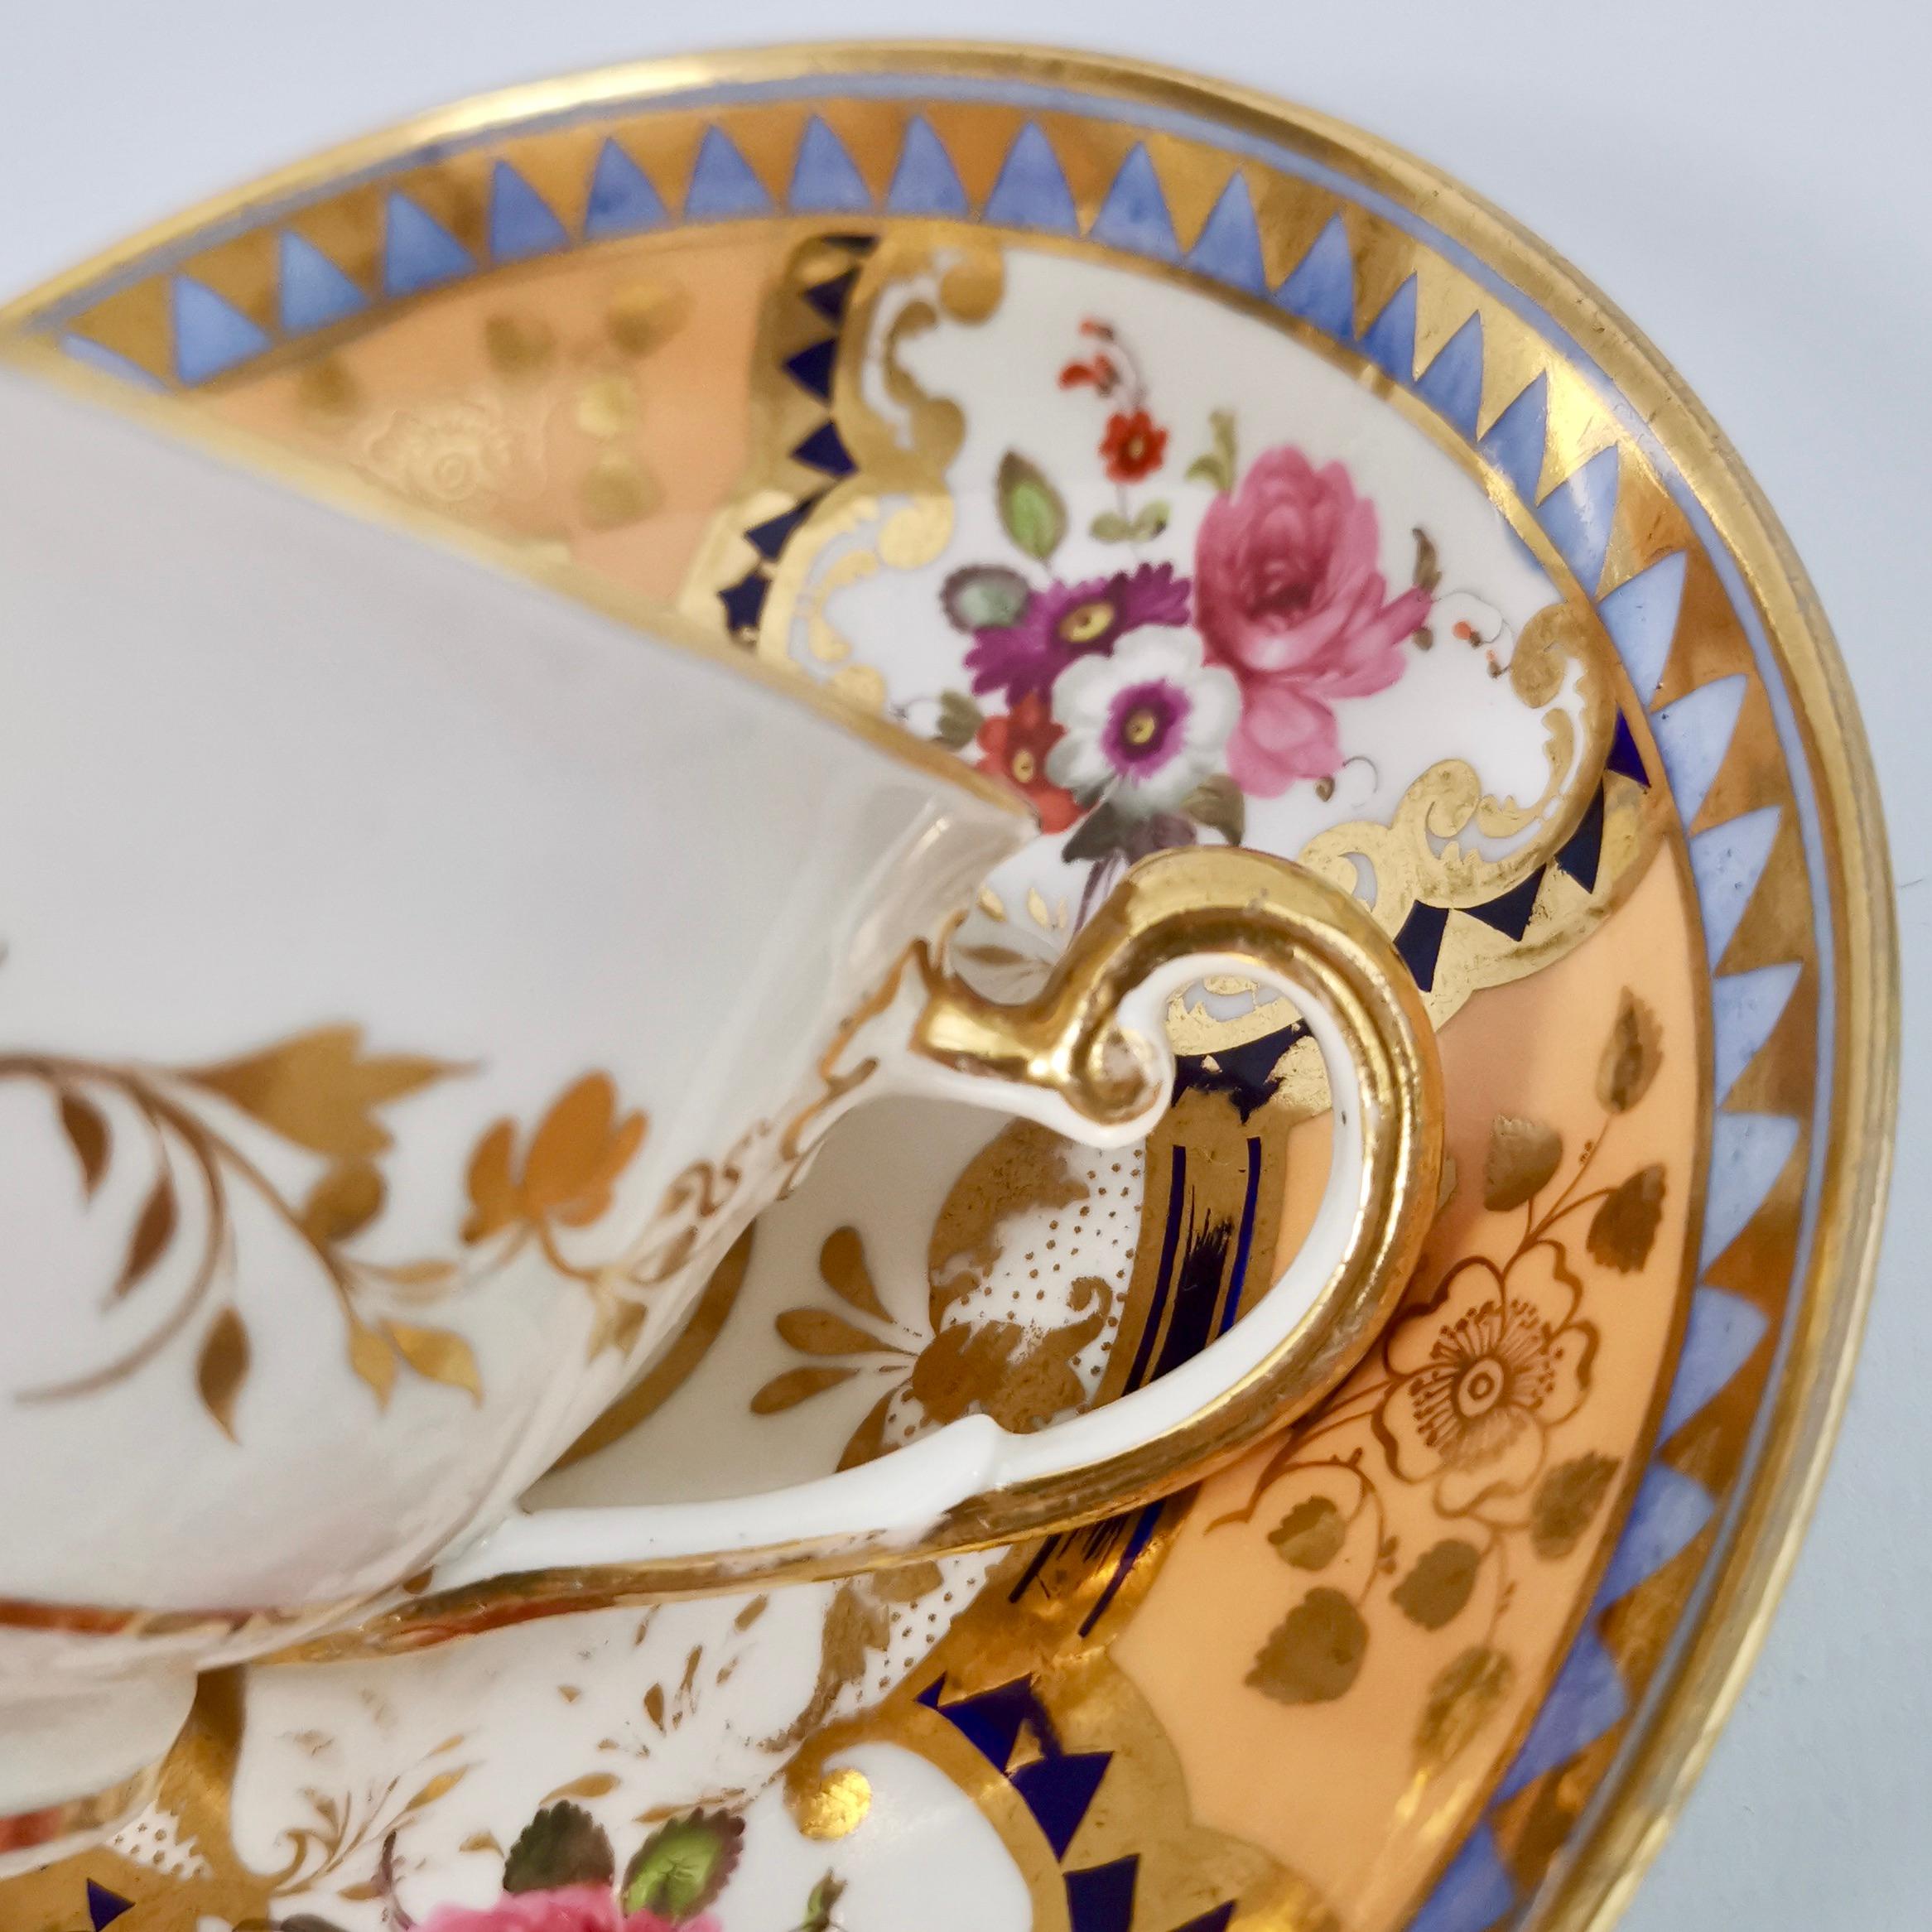 Ridgway Porcelain Teacup, Apricot, Periwinkle and Flowers, Regency circa 1820 1